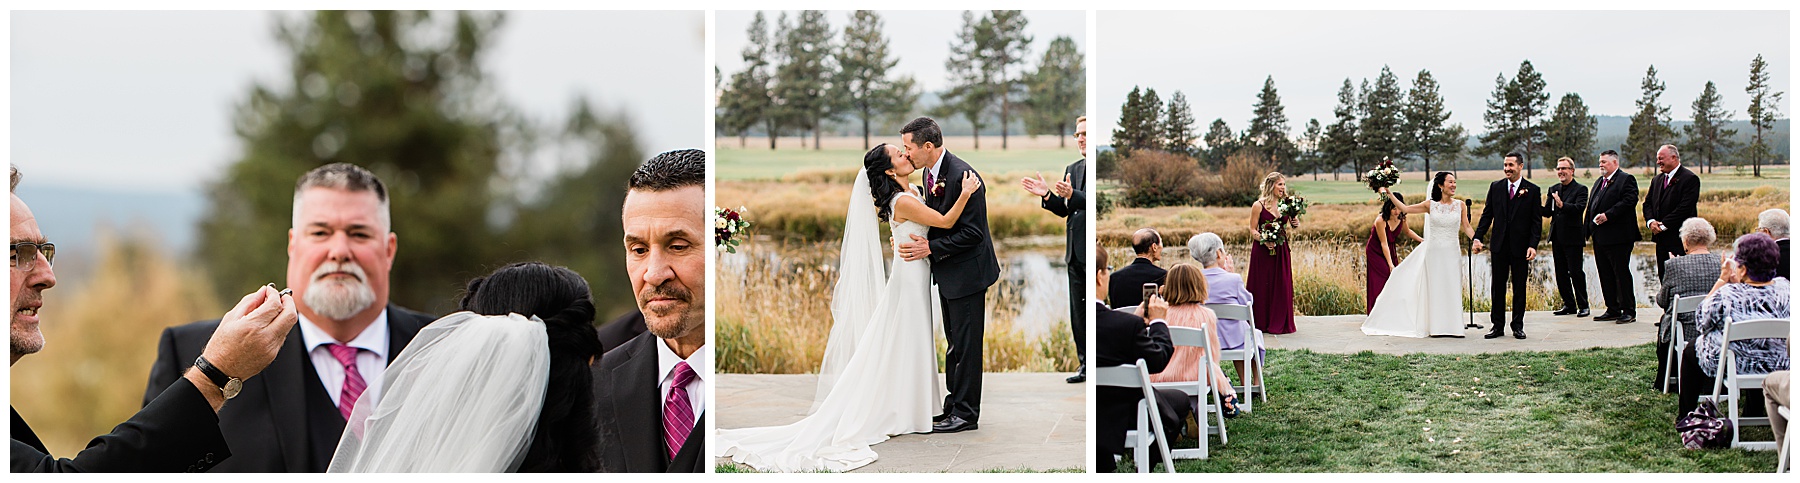 The couple is now husband wife and seal it with a kiss at the Sunriver Resort Fall Riverfront Wedding